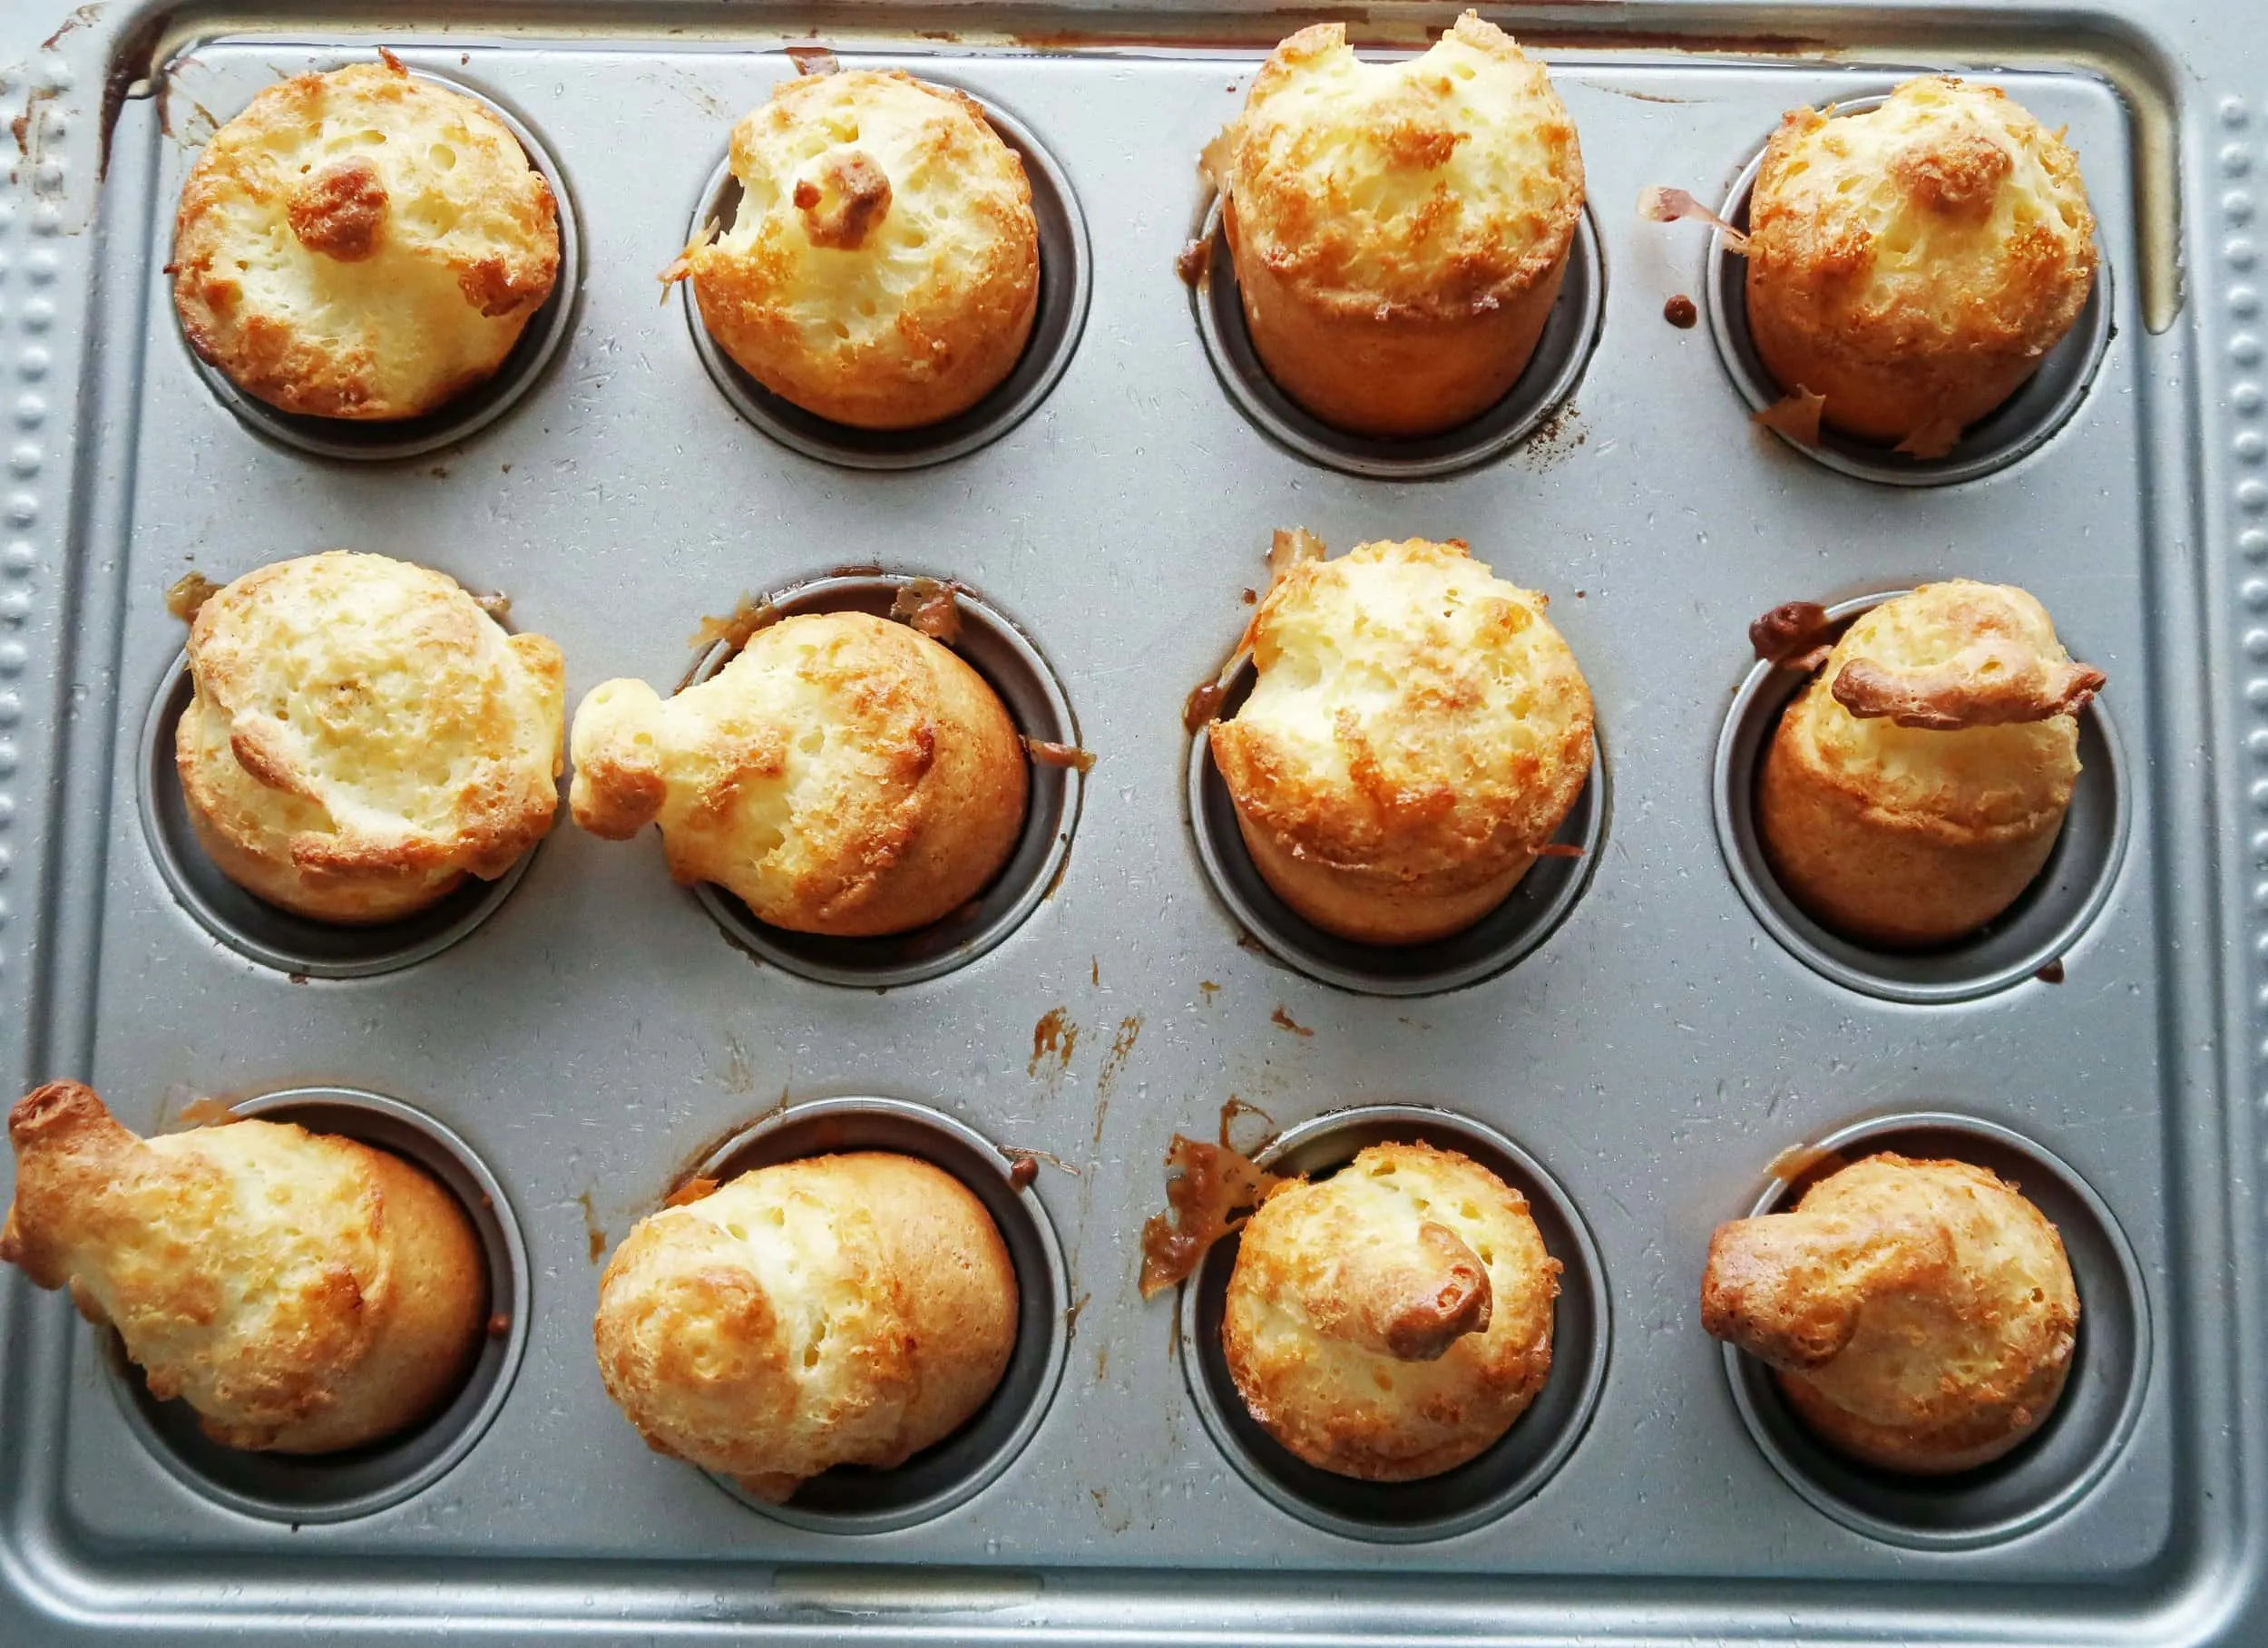 A pan of popovers with golden-brown tops.